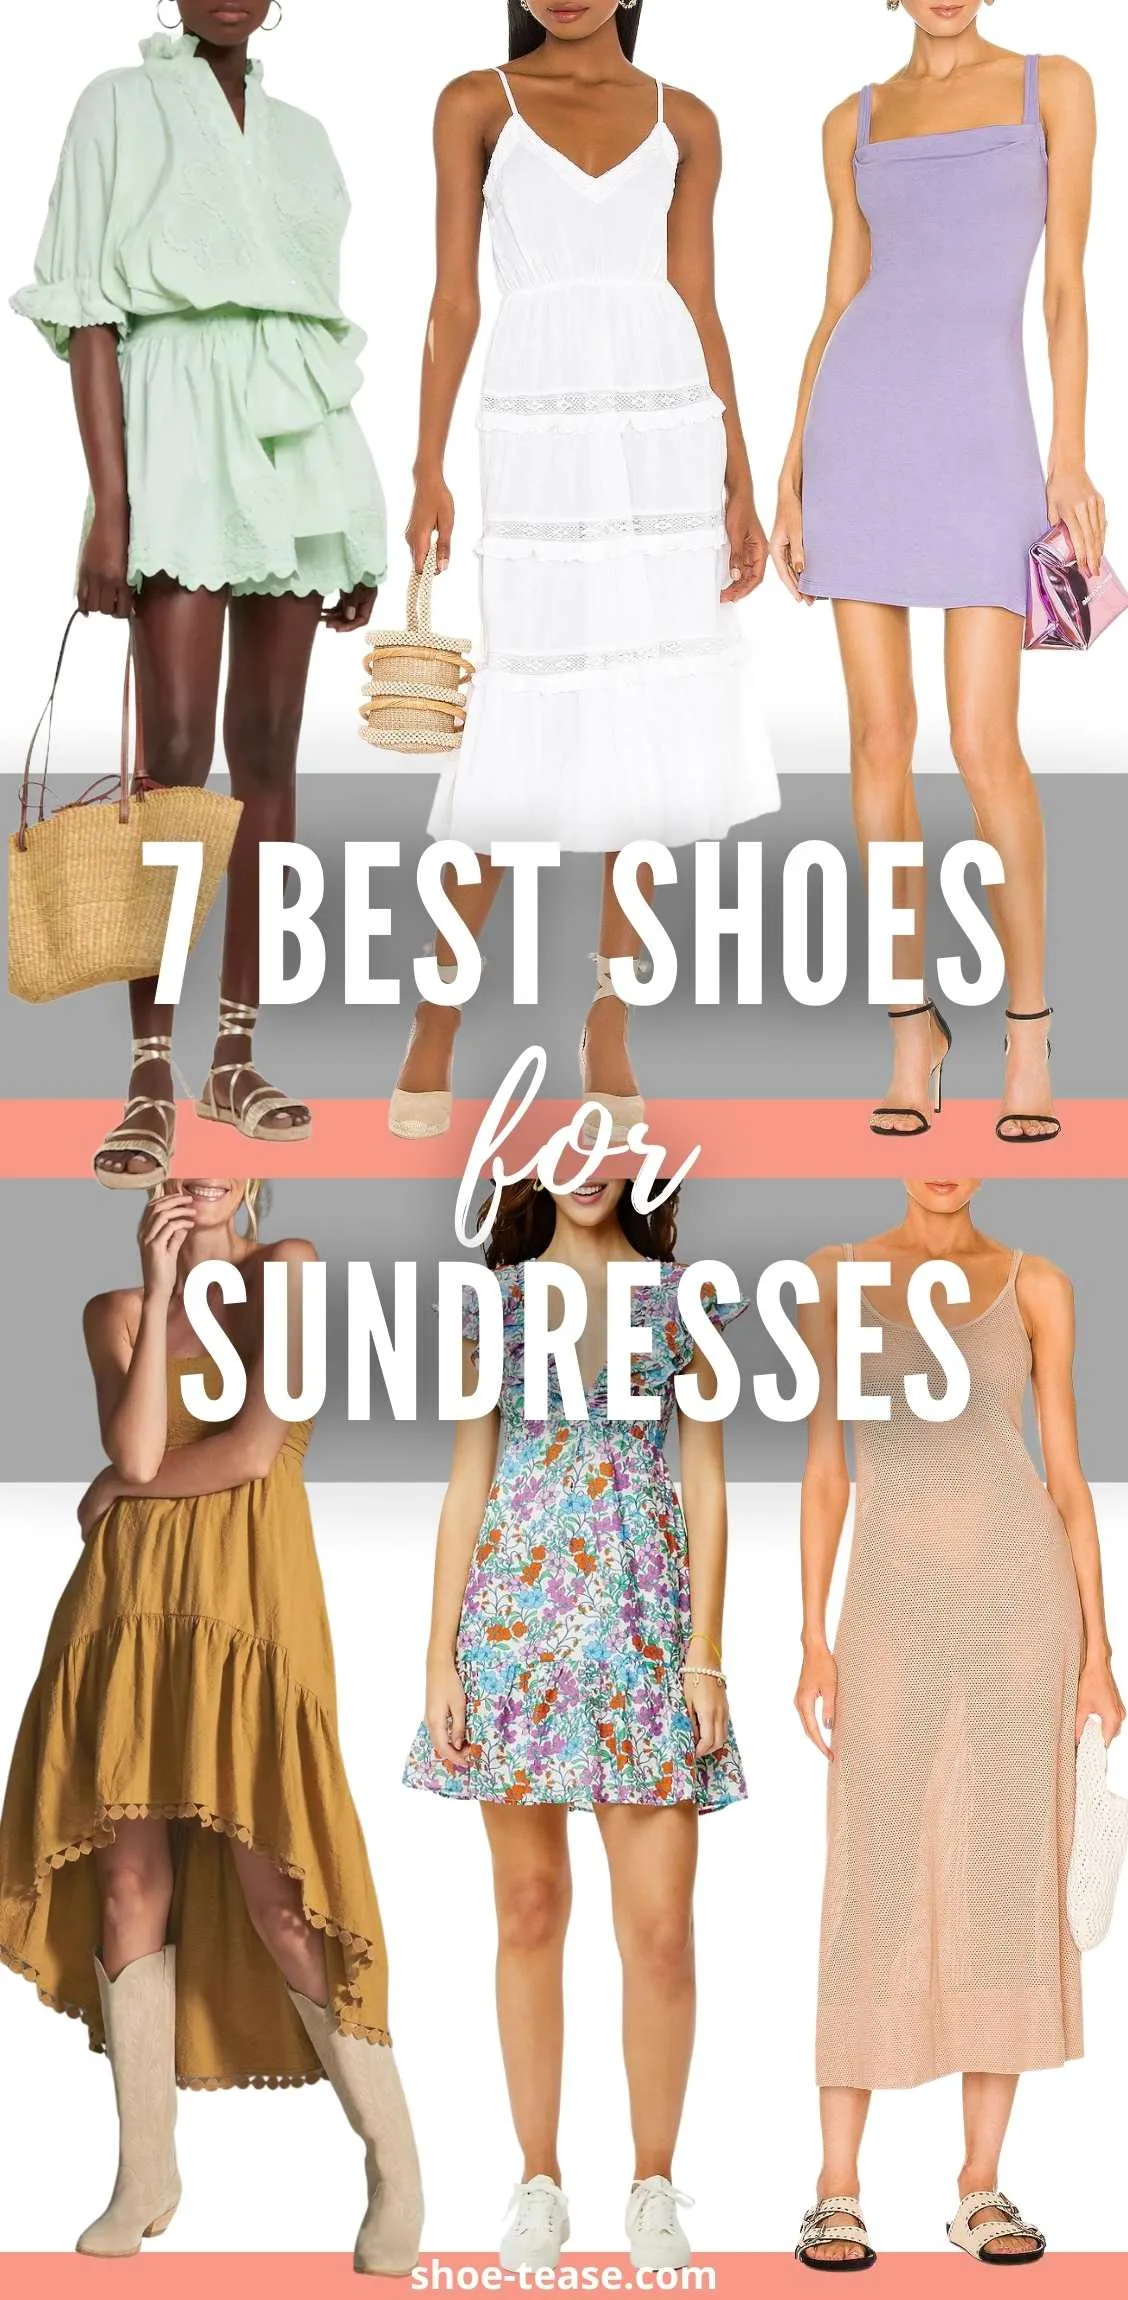 Collage with 6 women wearing the best shoes for sundresses.